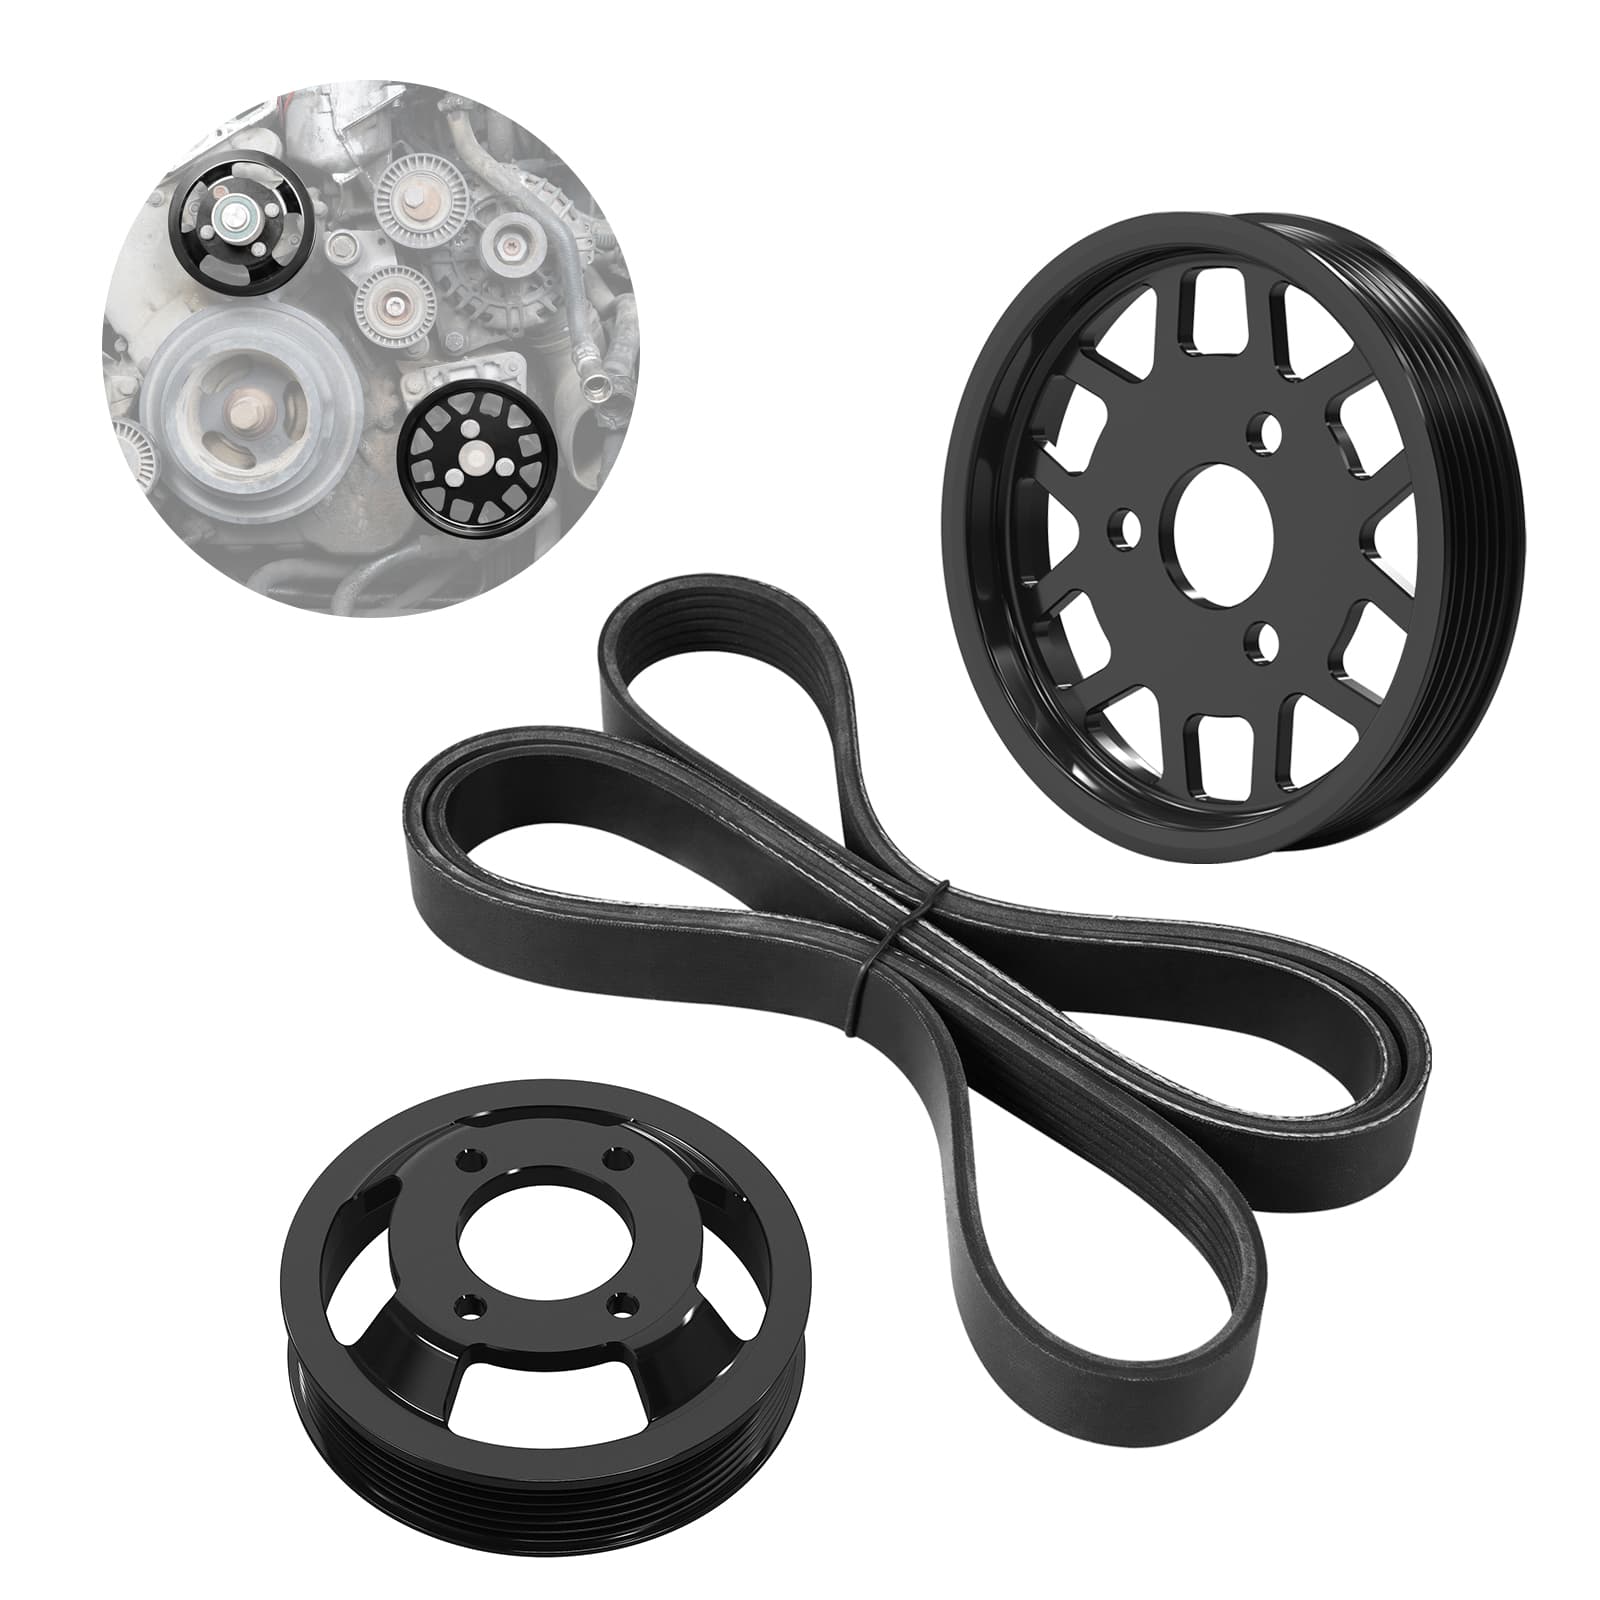 M52TU/M54 Aluminum Water Pump & Power Steering Pump Pulley Kit For BMW E46